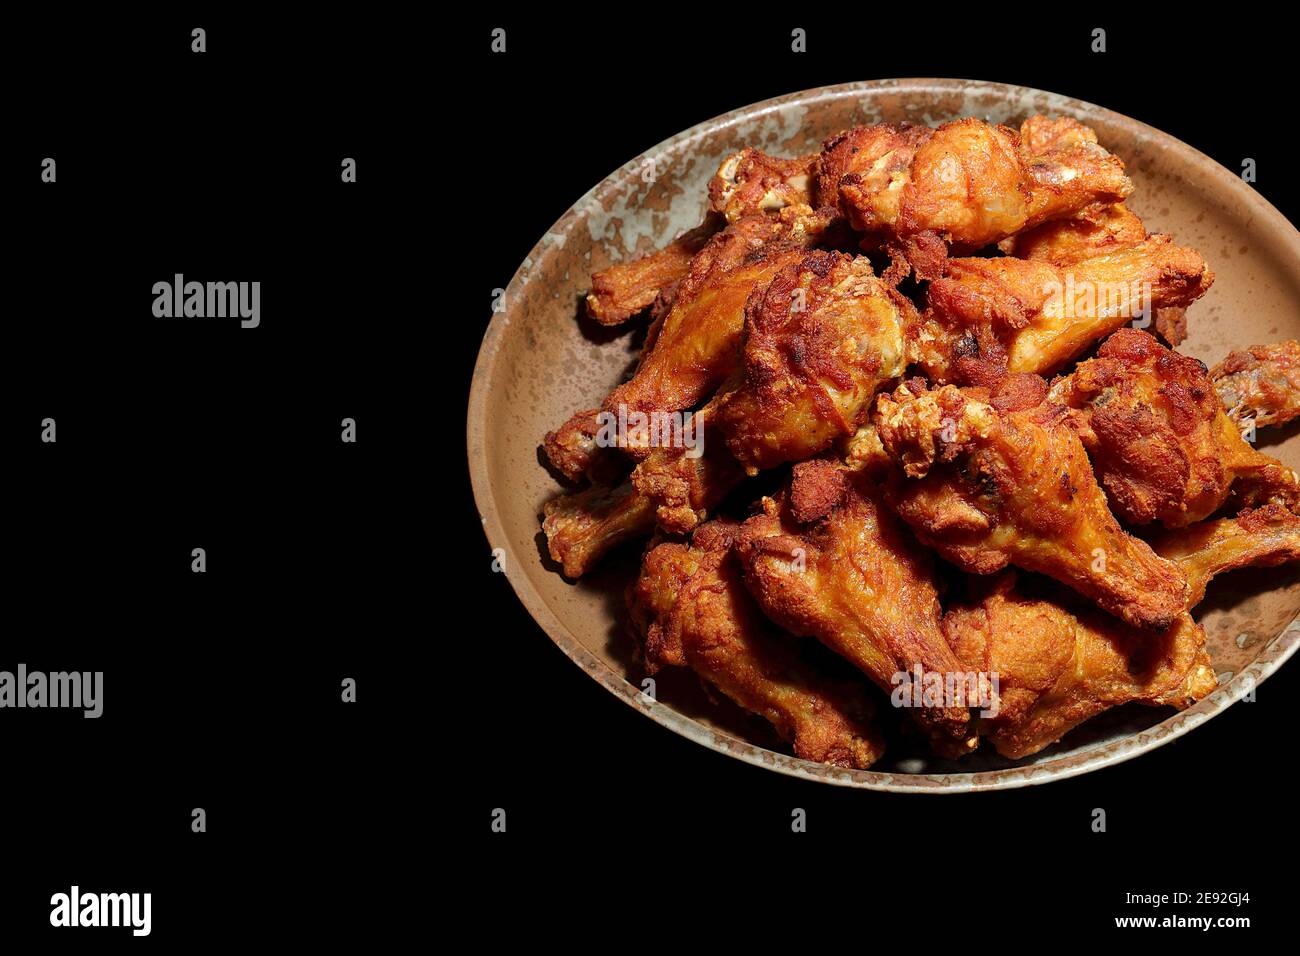 Fried chicken with fish sauce, several pieces on a plate. The black background has a place to place the text. Stock Photo